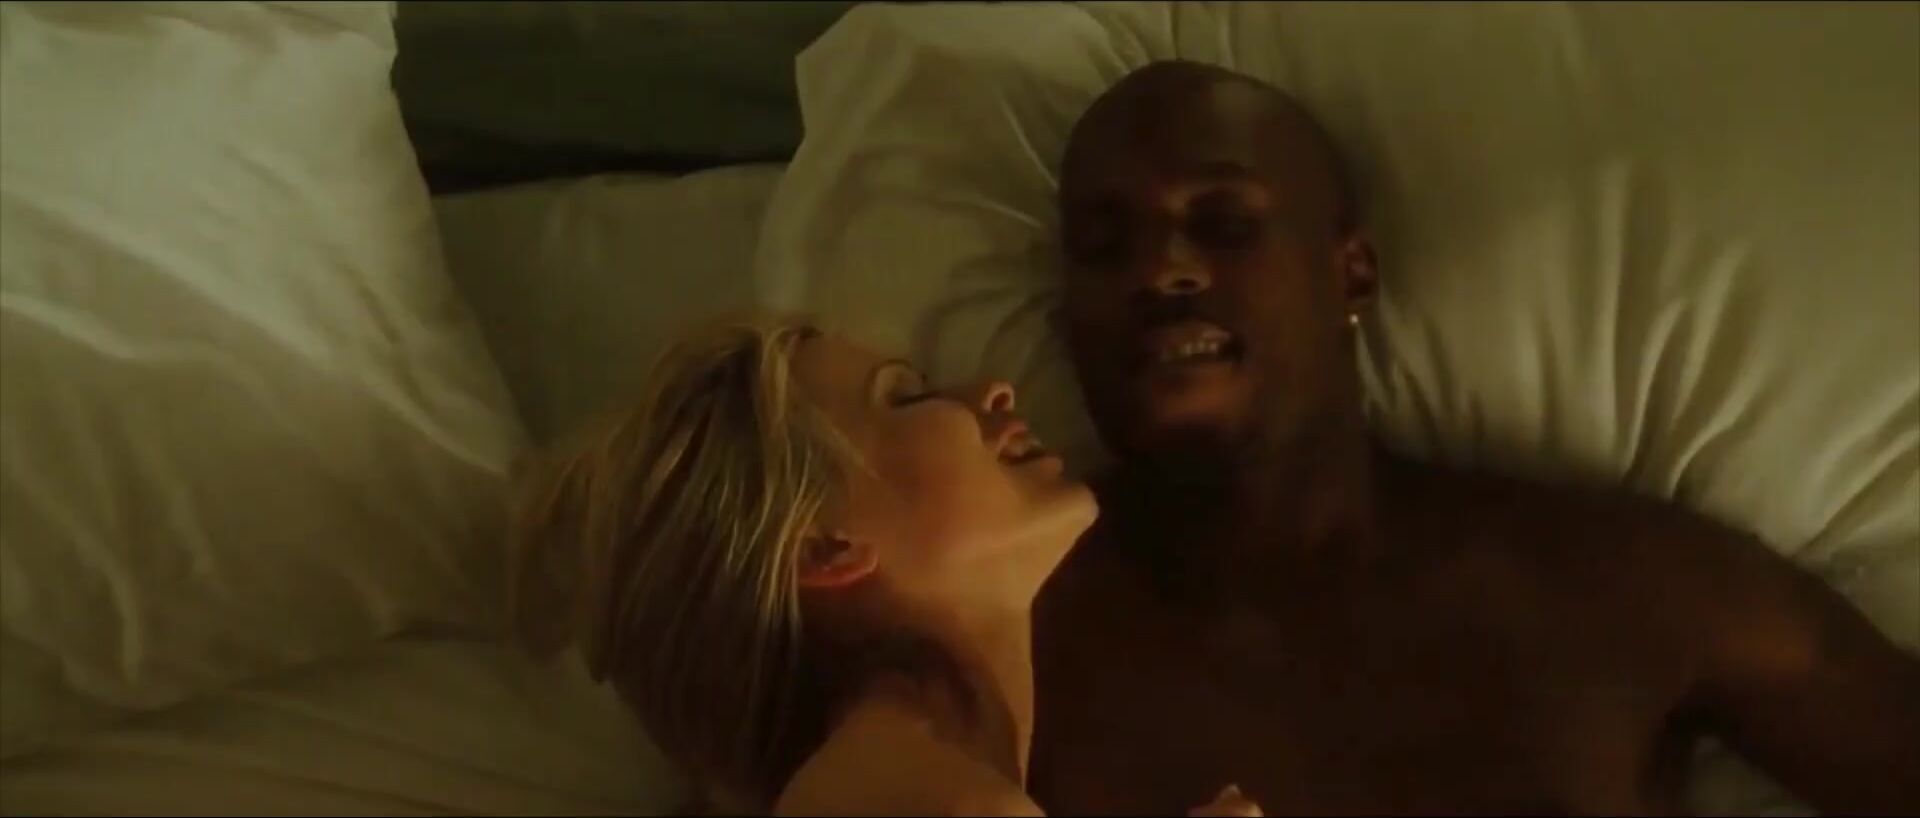 Amateur Porn Sex scene compilation of DMX making it with every black and white girl on his way Excitemii - 1